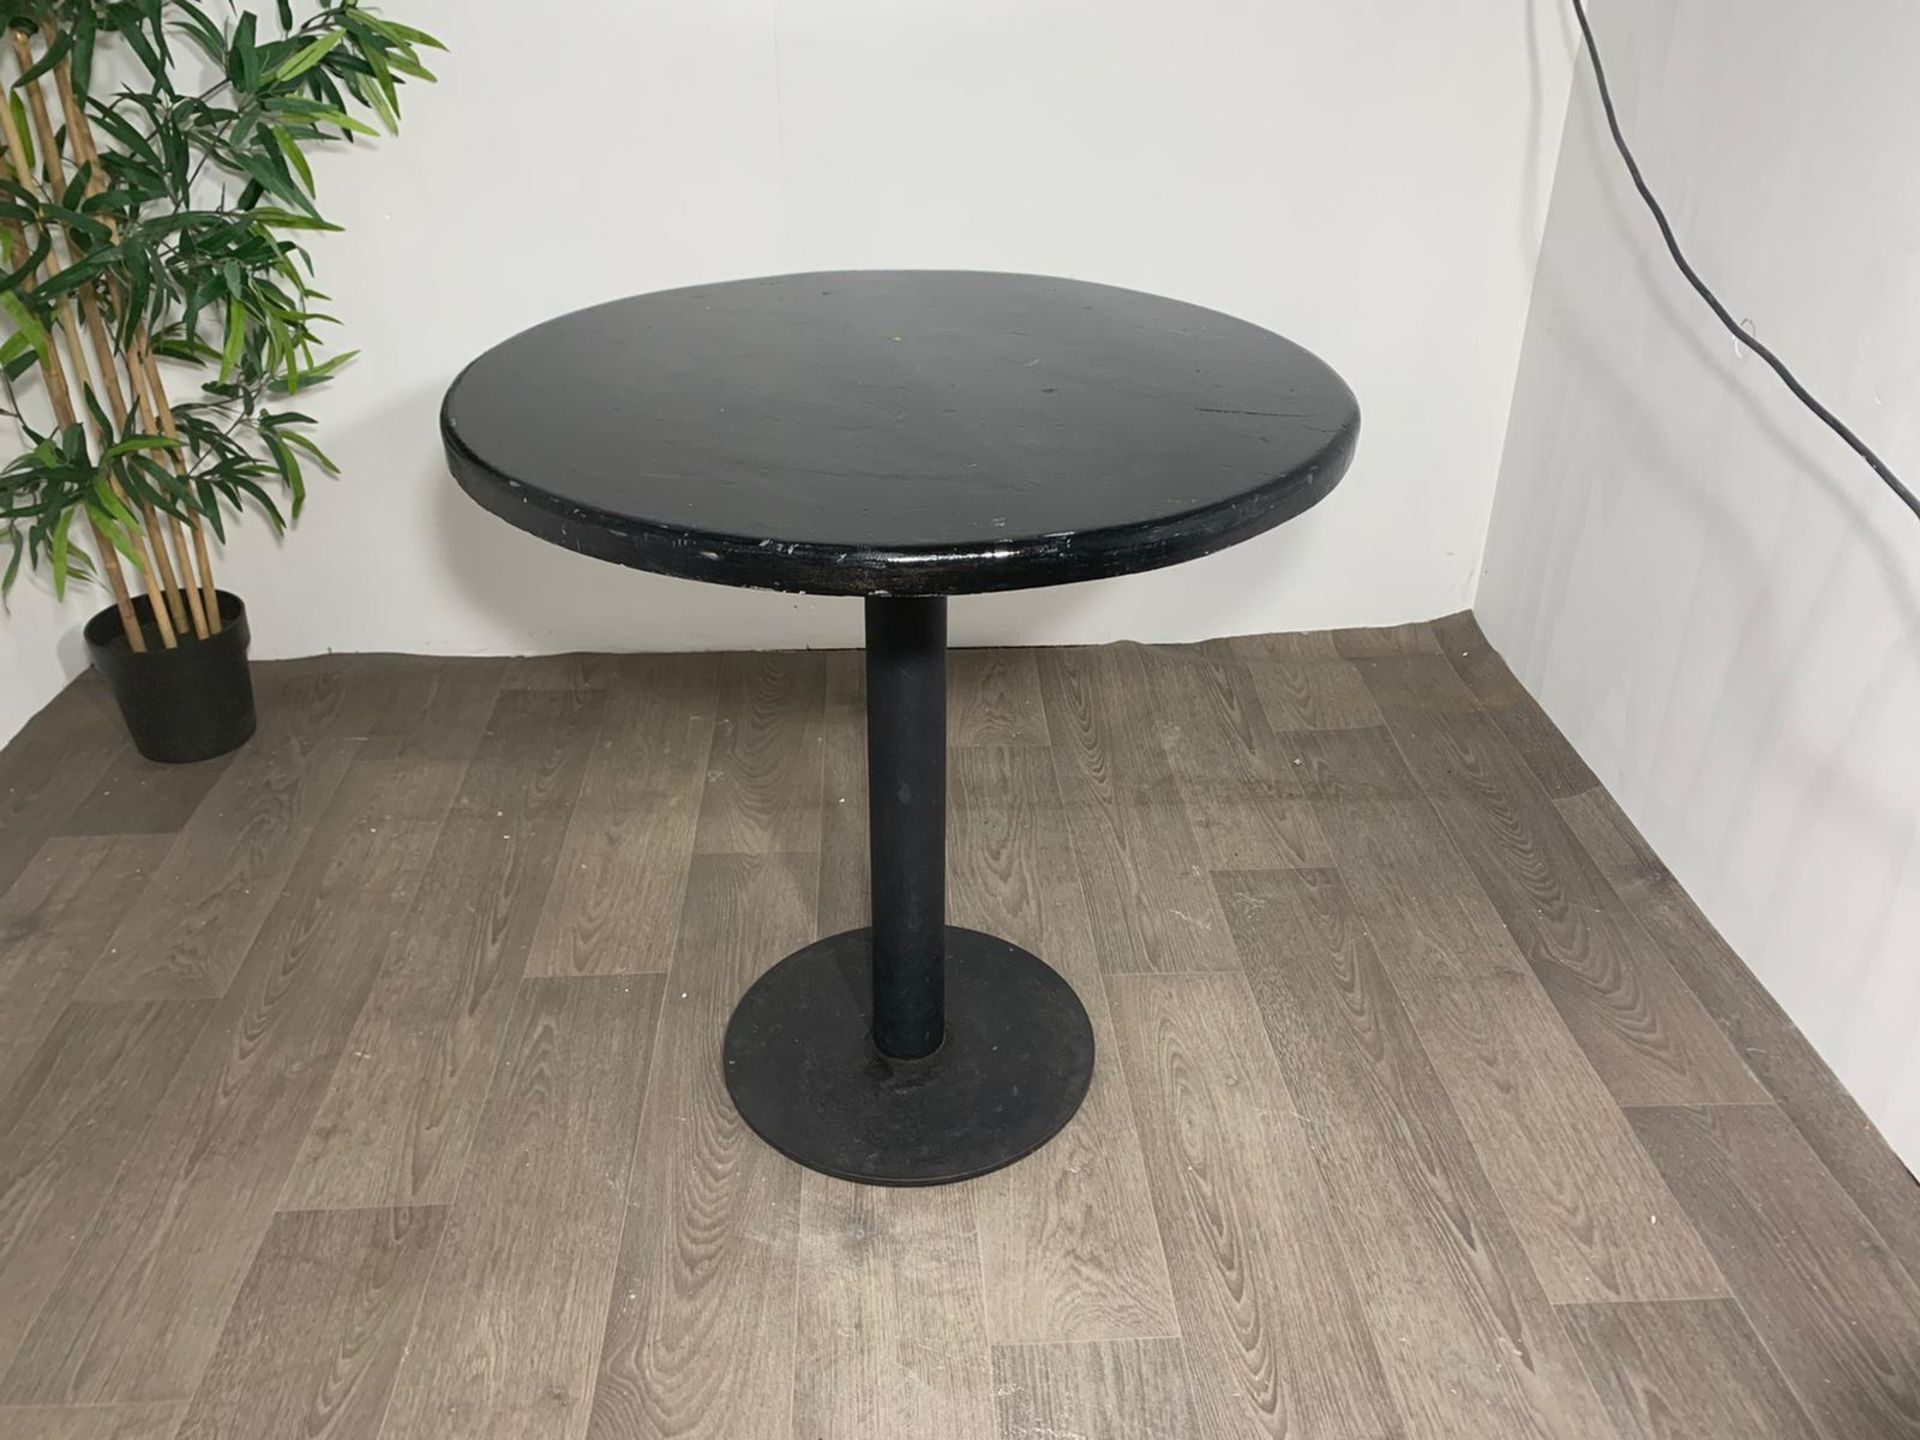 Black Wooden Table - Image 2 of 2